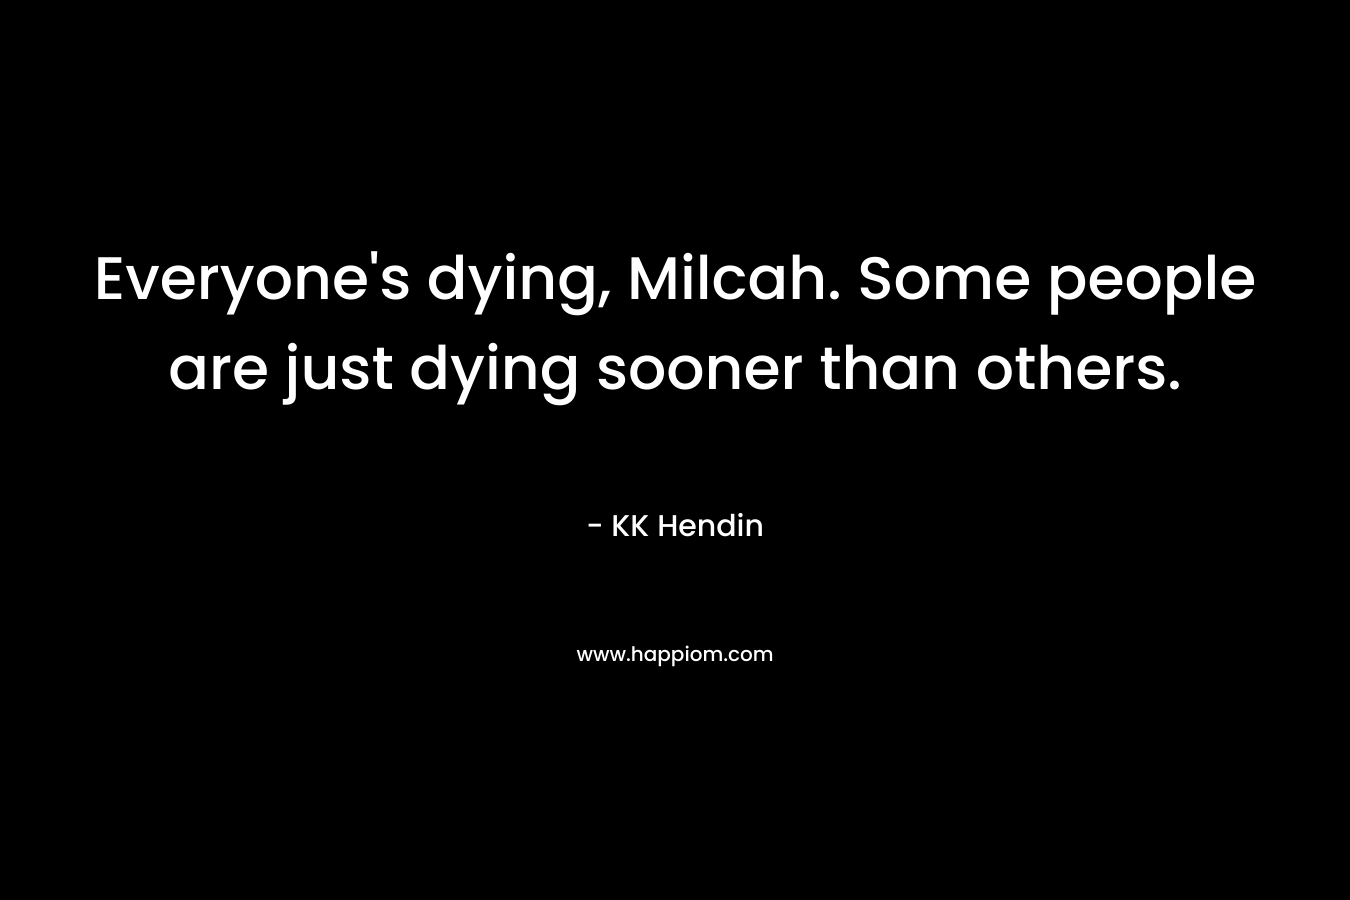 Everyone’s dying, Milcah. Some people are just dying sooner than others. – KK Hendin